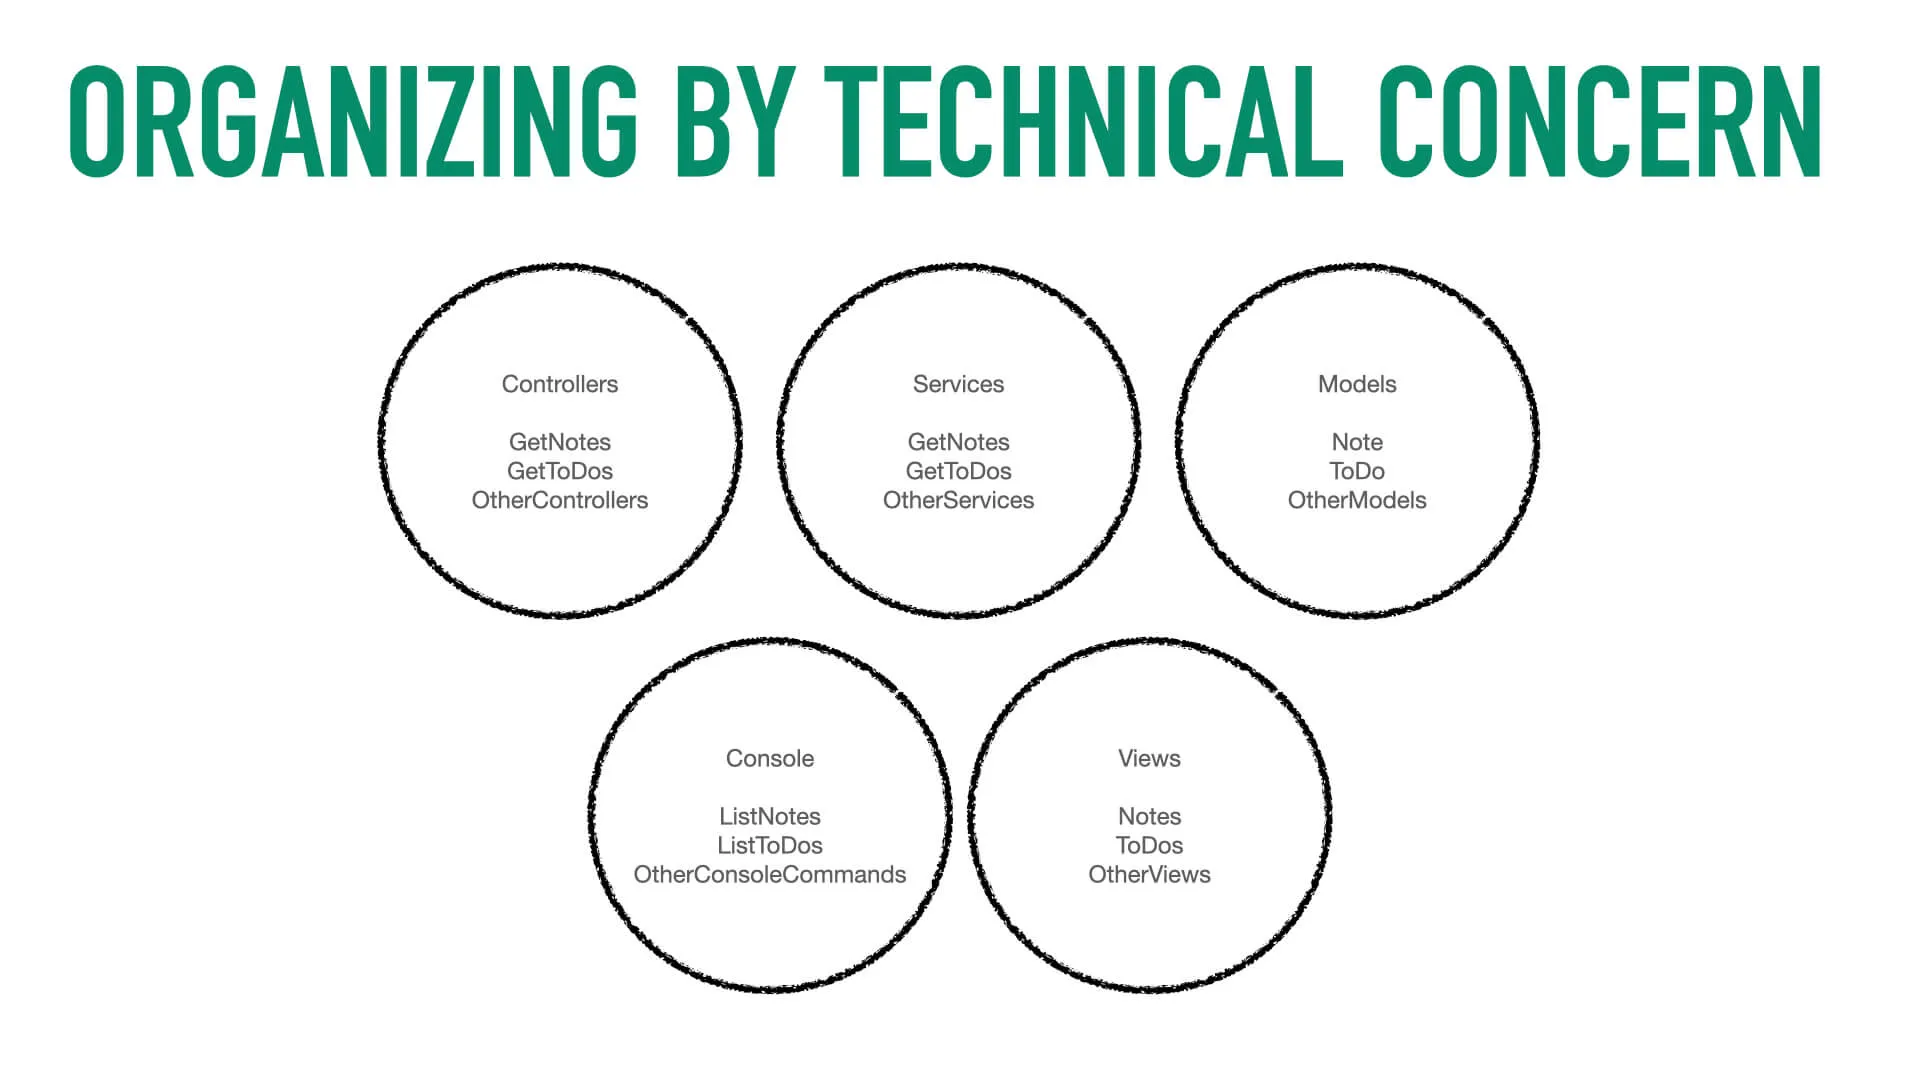 A graph of organizing by technical concern